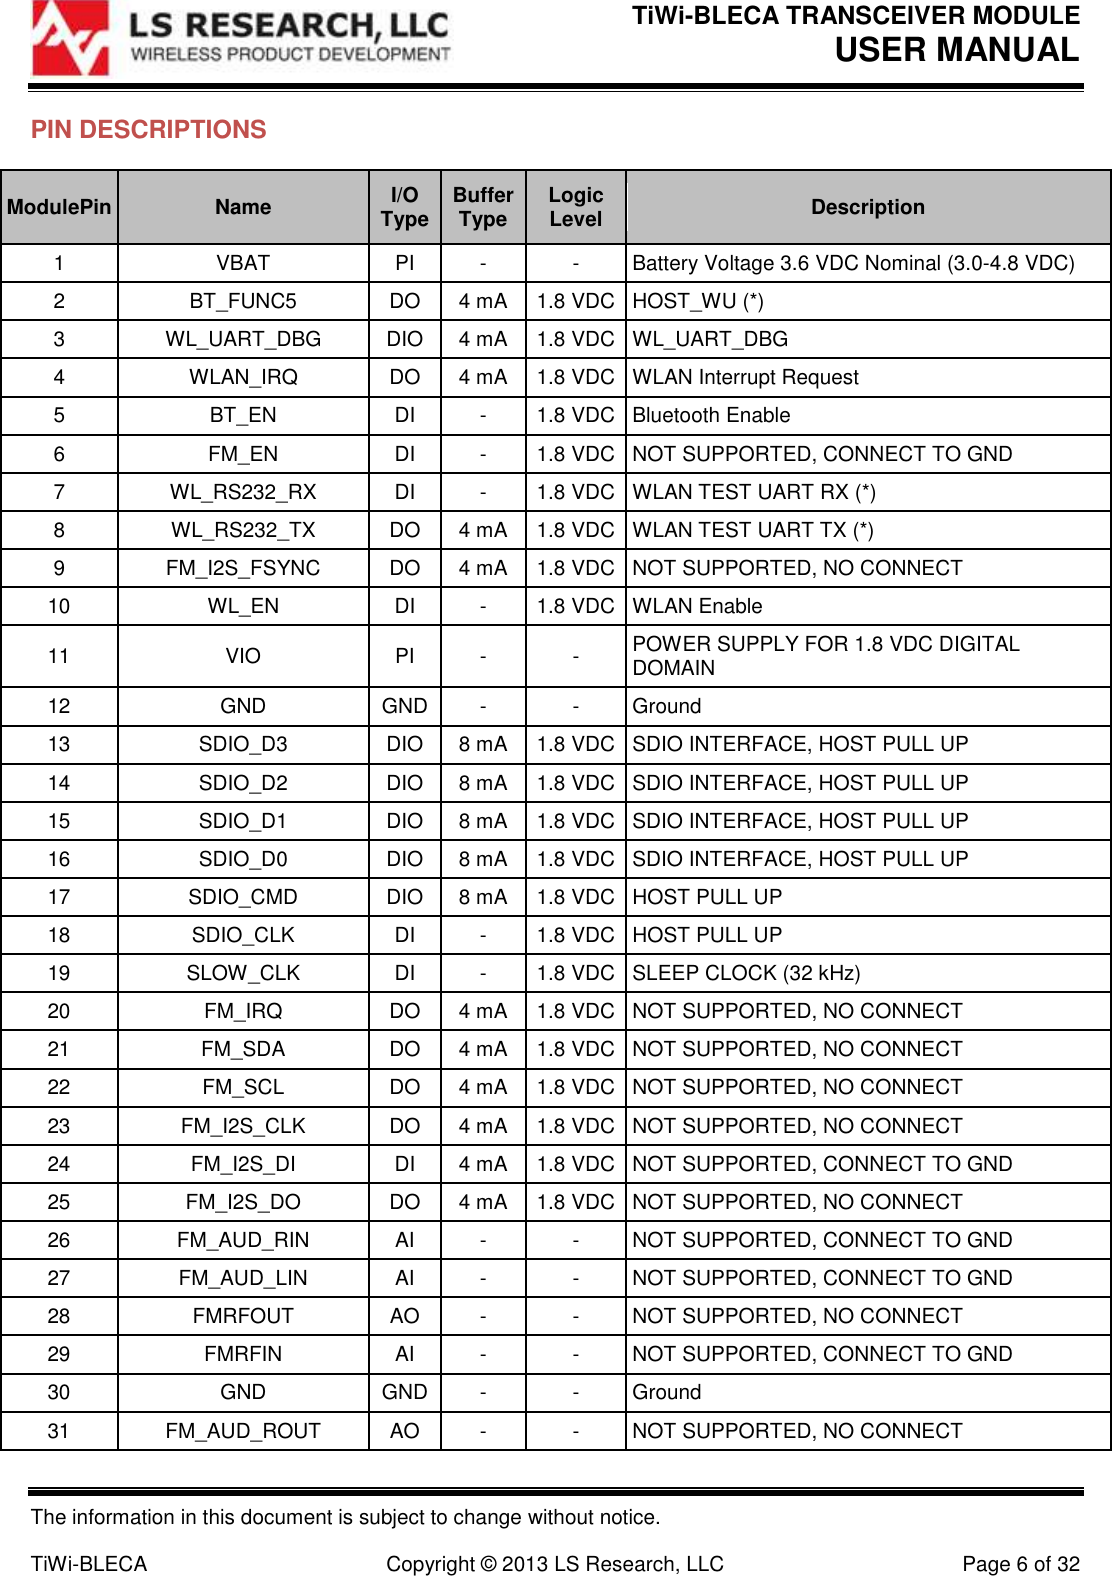 TiWi-BLECA TRANSCEIVER MODULE USER MANUAL   The information in this document is subject to change without notice.  TiWi-BLECA  Copyright © 2013 LS Research, LLC  Page 6 of 32 PIN DESCRIPTIONS ModulePin Name I/O Type Buffer Type Logic Level Description 1 VBAT PI - - Battery Voltage 3.6 VDC Nominal (3.0-4.8 VDC) 2 BT_FUNC5 DO 4 mA 1.8 VDC HOST_WU (*) 3 WL_UART_DBG DIO 4 mA 1.8 VDC WL_UART_DBG 4 WLAN_IRQ DO 4 mA 1.8 VDC WLAN Interrupt Request 5 BT_EN DI - 1.8 VDC Bluetooth Enable 6 FM_EN DI - 1.8 VDC NOT SUPPORTED, CONNECT TO GND 7 WL_RS232_RX DI - 1.8 VDC WLAN TEST UART RX (*) 8 WL_RS232_TX DO 4 mA 1.8 VDC WLAN TEST UART TX (*) 9 FM_I2S_FSYNC DO 4 mA 1.8 VDC NOT SUPPORTED, NO CONNECT 10 WL_EN DI - 1.8 VDC WLAN Enable 11 VIO PI - - POWER SUPPLY FOR 1.8 VDC DIGITAL DOMAIN 12 GND GND - - Ground 13 SDIO_D3 DIO 8 mA 1.8 VDC SDIO INTERFACE, HOST PULL UP 14 SDIO_D2 DIO 8 mA 1.8 VDC SDIO INTERFACE, HOST PULL UP 15 SDIO_D1 DIO 8 mA 1.8 VDC SDIO INTERFACE, HOST PULL UP 16 SDIO_D0 DIO 8 mA 1.8 VDC SDIO INTERFACE, HOST PULL UP 17 SDIO_CMD DIO 8 mA 1.8 VDC HOST PULL UP 18 SDIO_CLK DI - 1.8 VDC HOST PULL UP 19 SLOW_CLK DI - 1.8 VDC SLEEP CLOCK (32 kHz) 20 FM_IRQ DO 4 mA 1.8 VDC NOT SUPPORTED, NO CONNECT 21 FM_SDA DO 4 mA 1.8 VDC NOT SUPPORTED, NO CONNECT 22 FM_SCL DO 4 mA 1.8 VDC NOT SUPPORTED, NO CONNECT 23 FM_I2S_CLK DO 4 mA 1.8 VDC NOT SUPPORTED, NO CONNECT 24 FM_I2S_DI DI 4 mA 1.8 VDC NOT SUPPORTED, CONNECT TO GND 25 FM_I2S_DO DO 4 mA 1.8 VDC NOT SUPPORTED, NO CONNECT 26 FM_AUD_RIN AI - - NOT SUPPORTED, CONNECT TO GND 27 FM_AUD_LIN AI - - NOT SUPPORTED, CONNECT TO GND 28 FMRFOUT AO - - NOT SUPPORTED, NO CONNECT 29 FMRFIN AI - - NOT SUPPORTED, CONNECT TO GND 30 GND GND - - Ground 31 FM_AUD_ROUT AO - - NOT SUPPORTED, NO CONNECT 